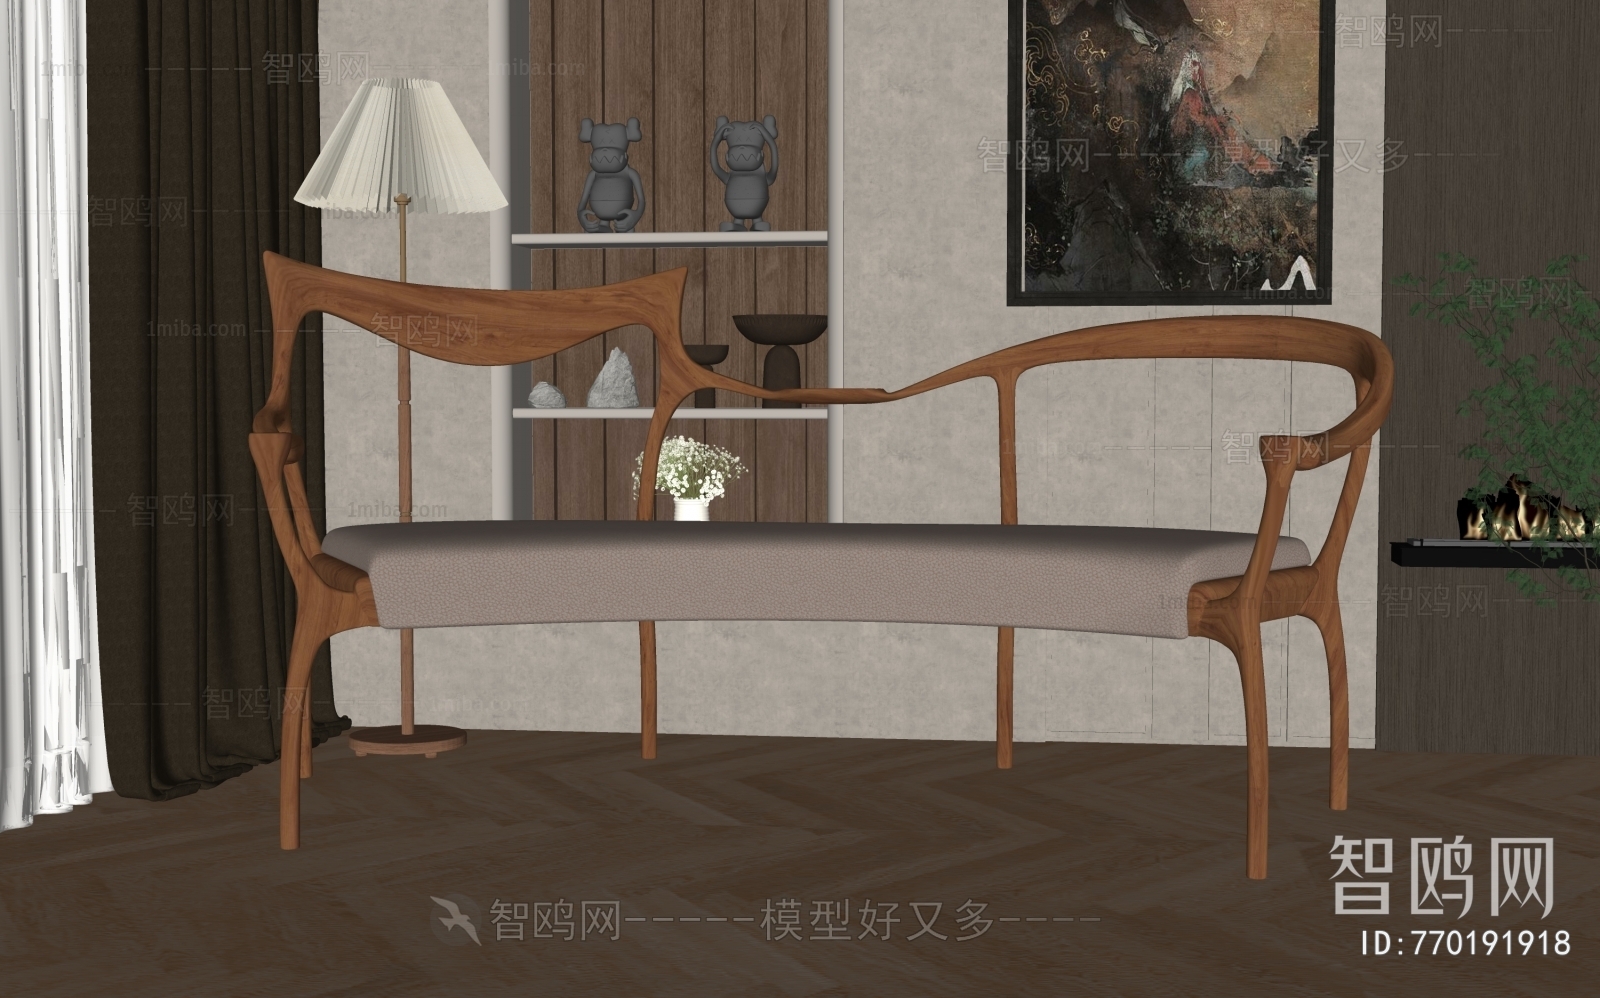 New Chinese Style Curved Sofa